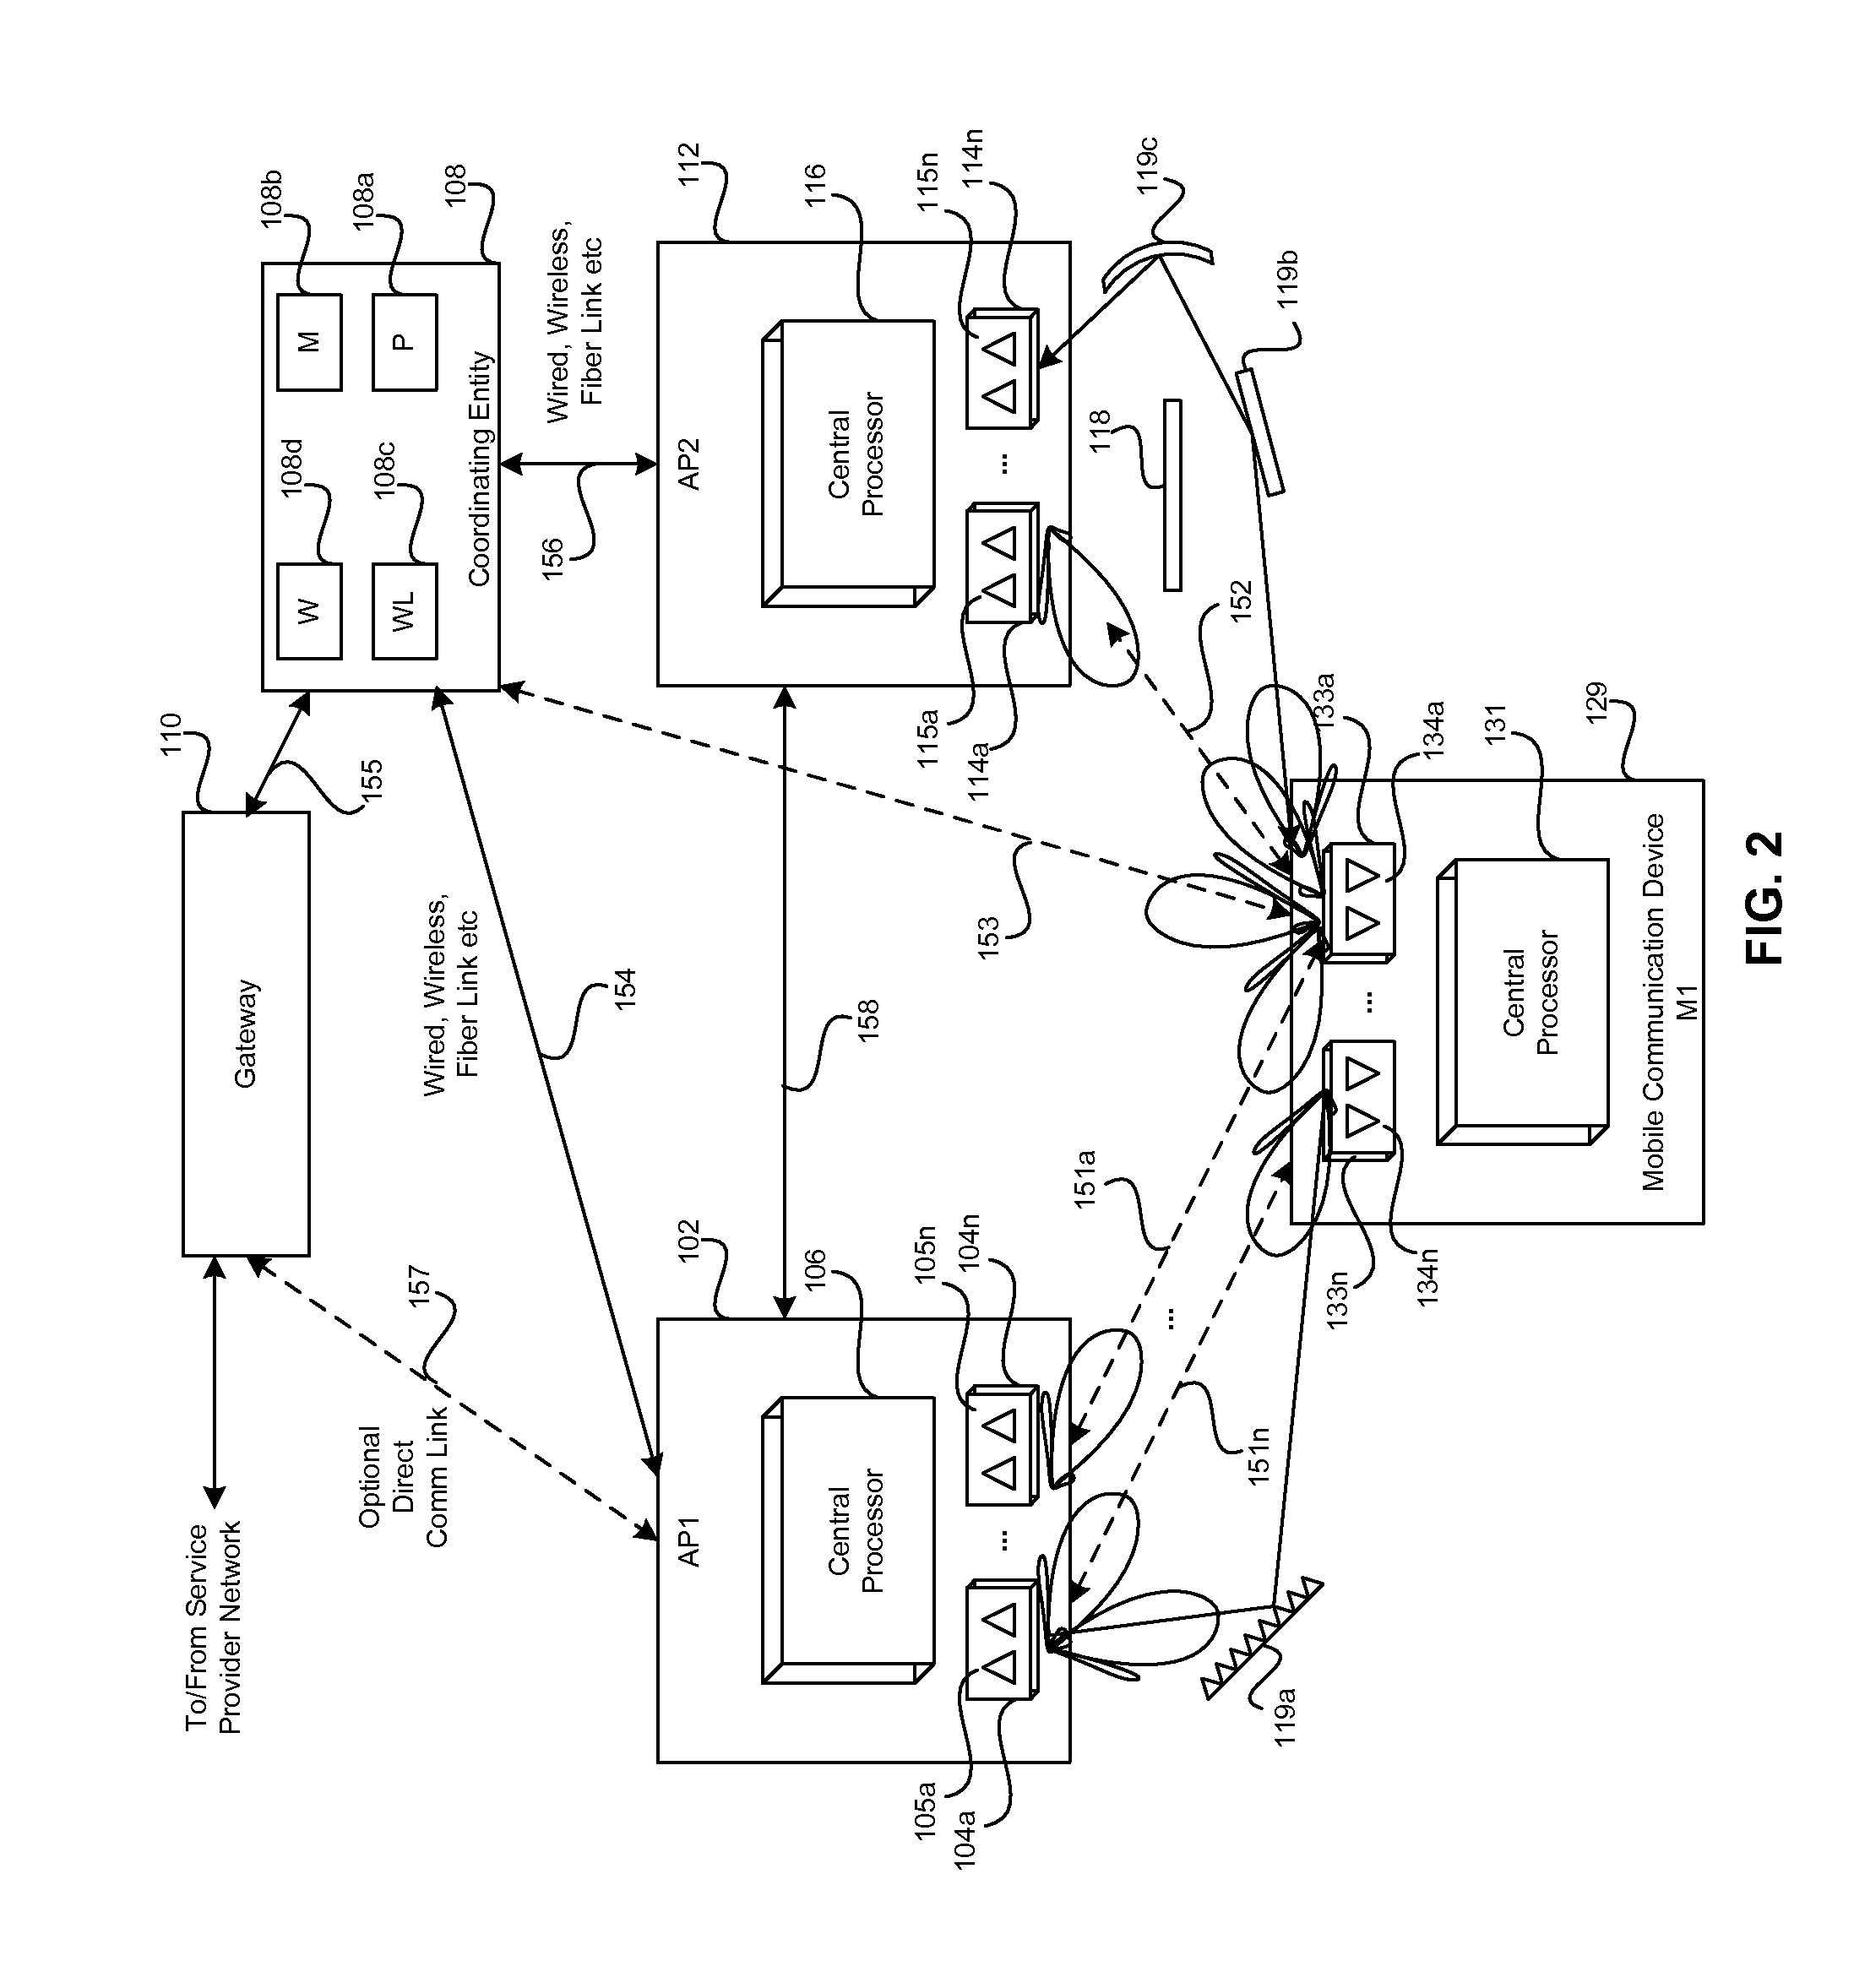 Method and system for optimizing communication in leaky wave distributed transceiver environments